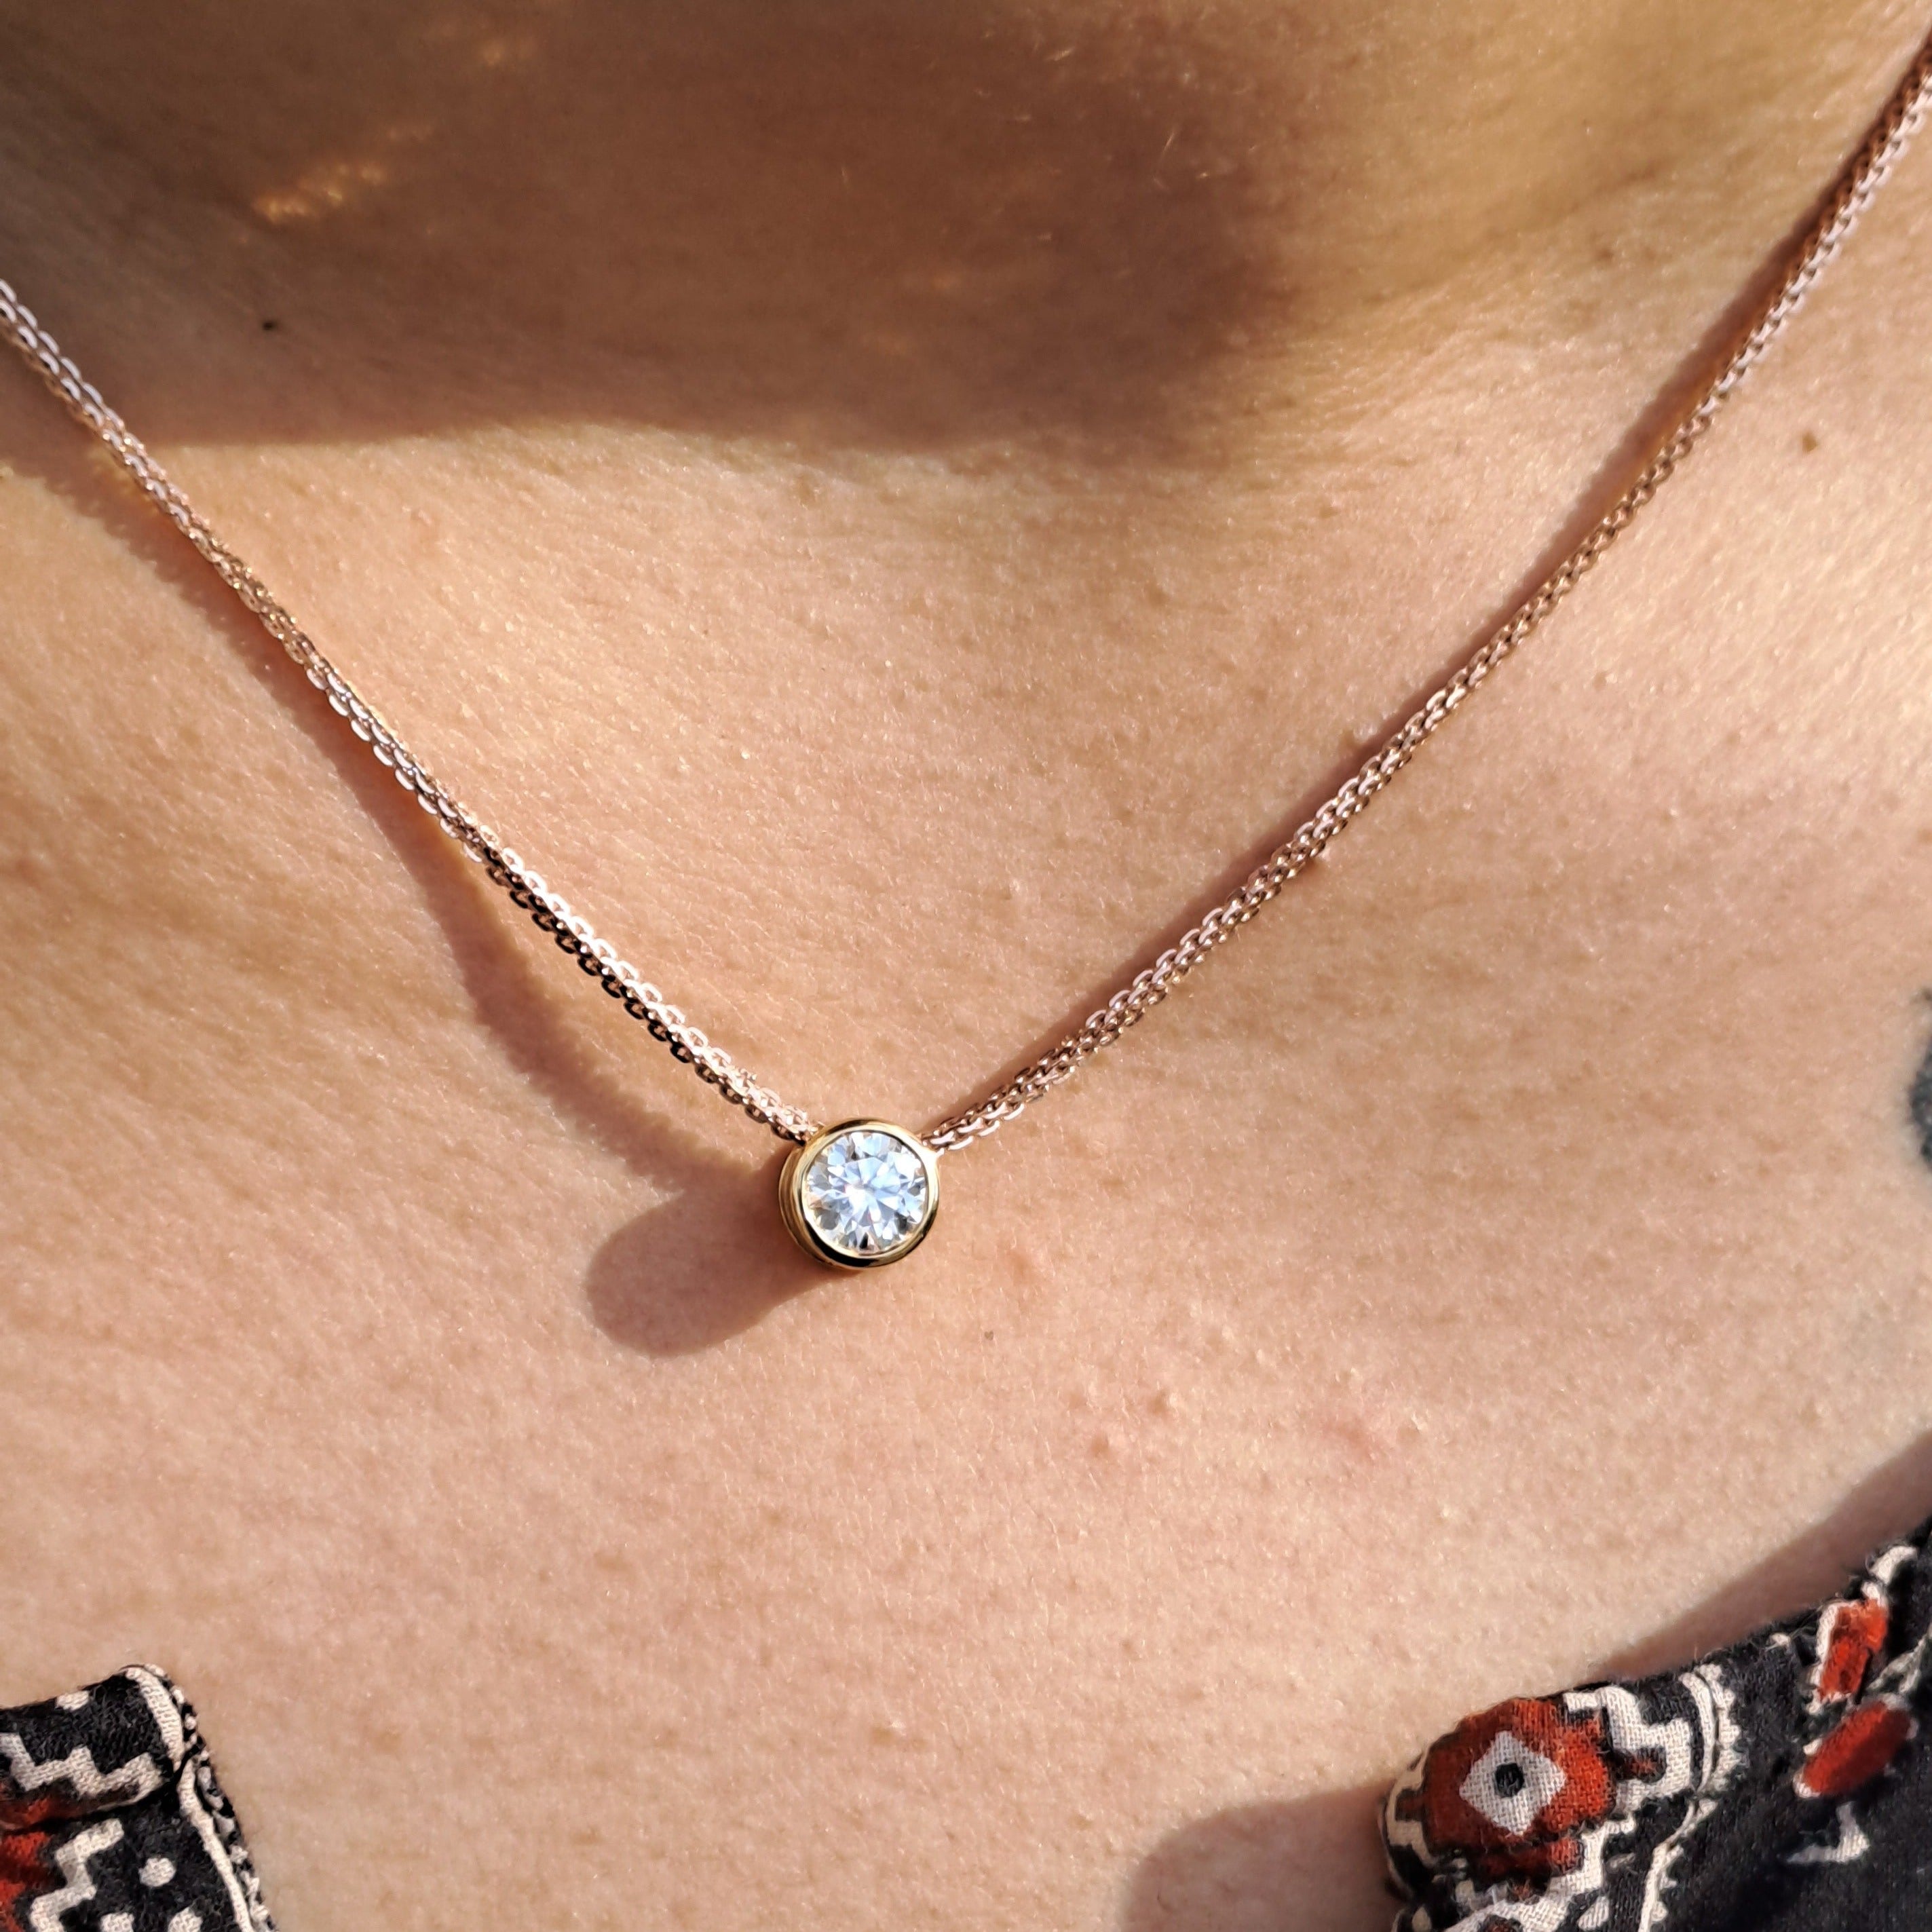 Buy Solitaire Diamond Necklace, Lab Grown Diamond Solitaire Necklace, Eco  Friendly CVD HPHT Diamond Necklace, 1 Ct Solitaire Diamond Necklace Online  in India - Etsy